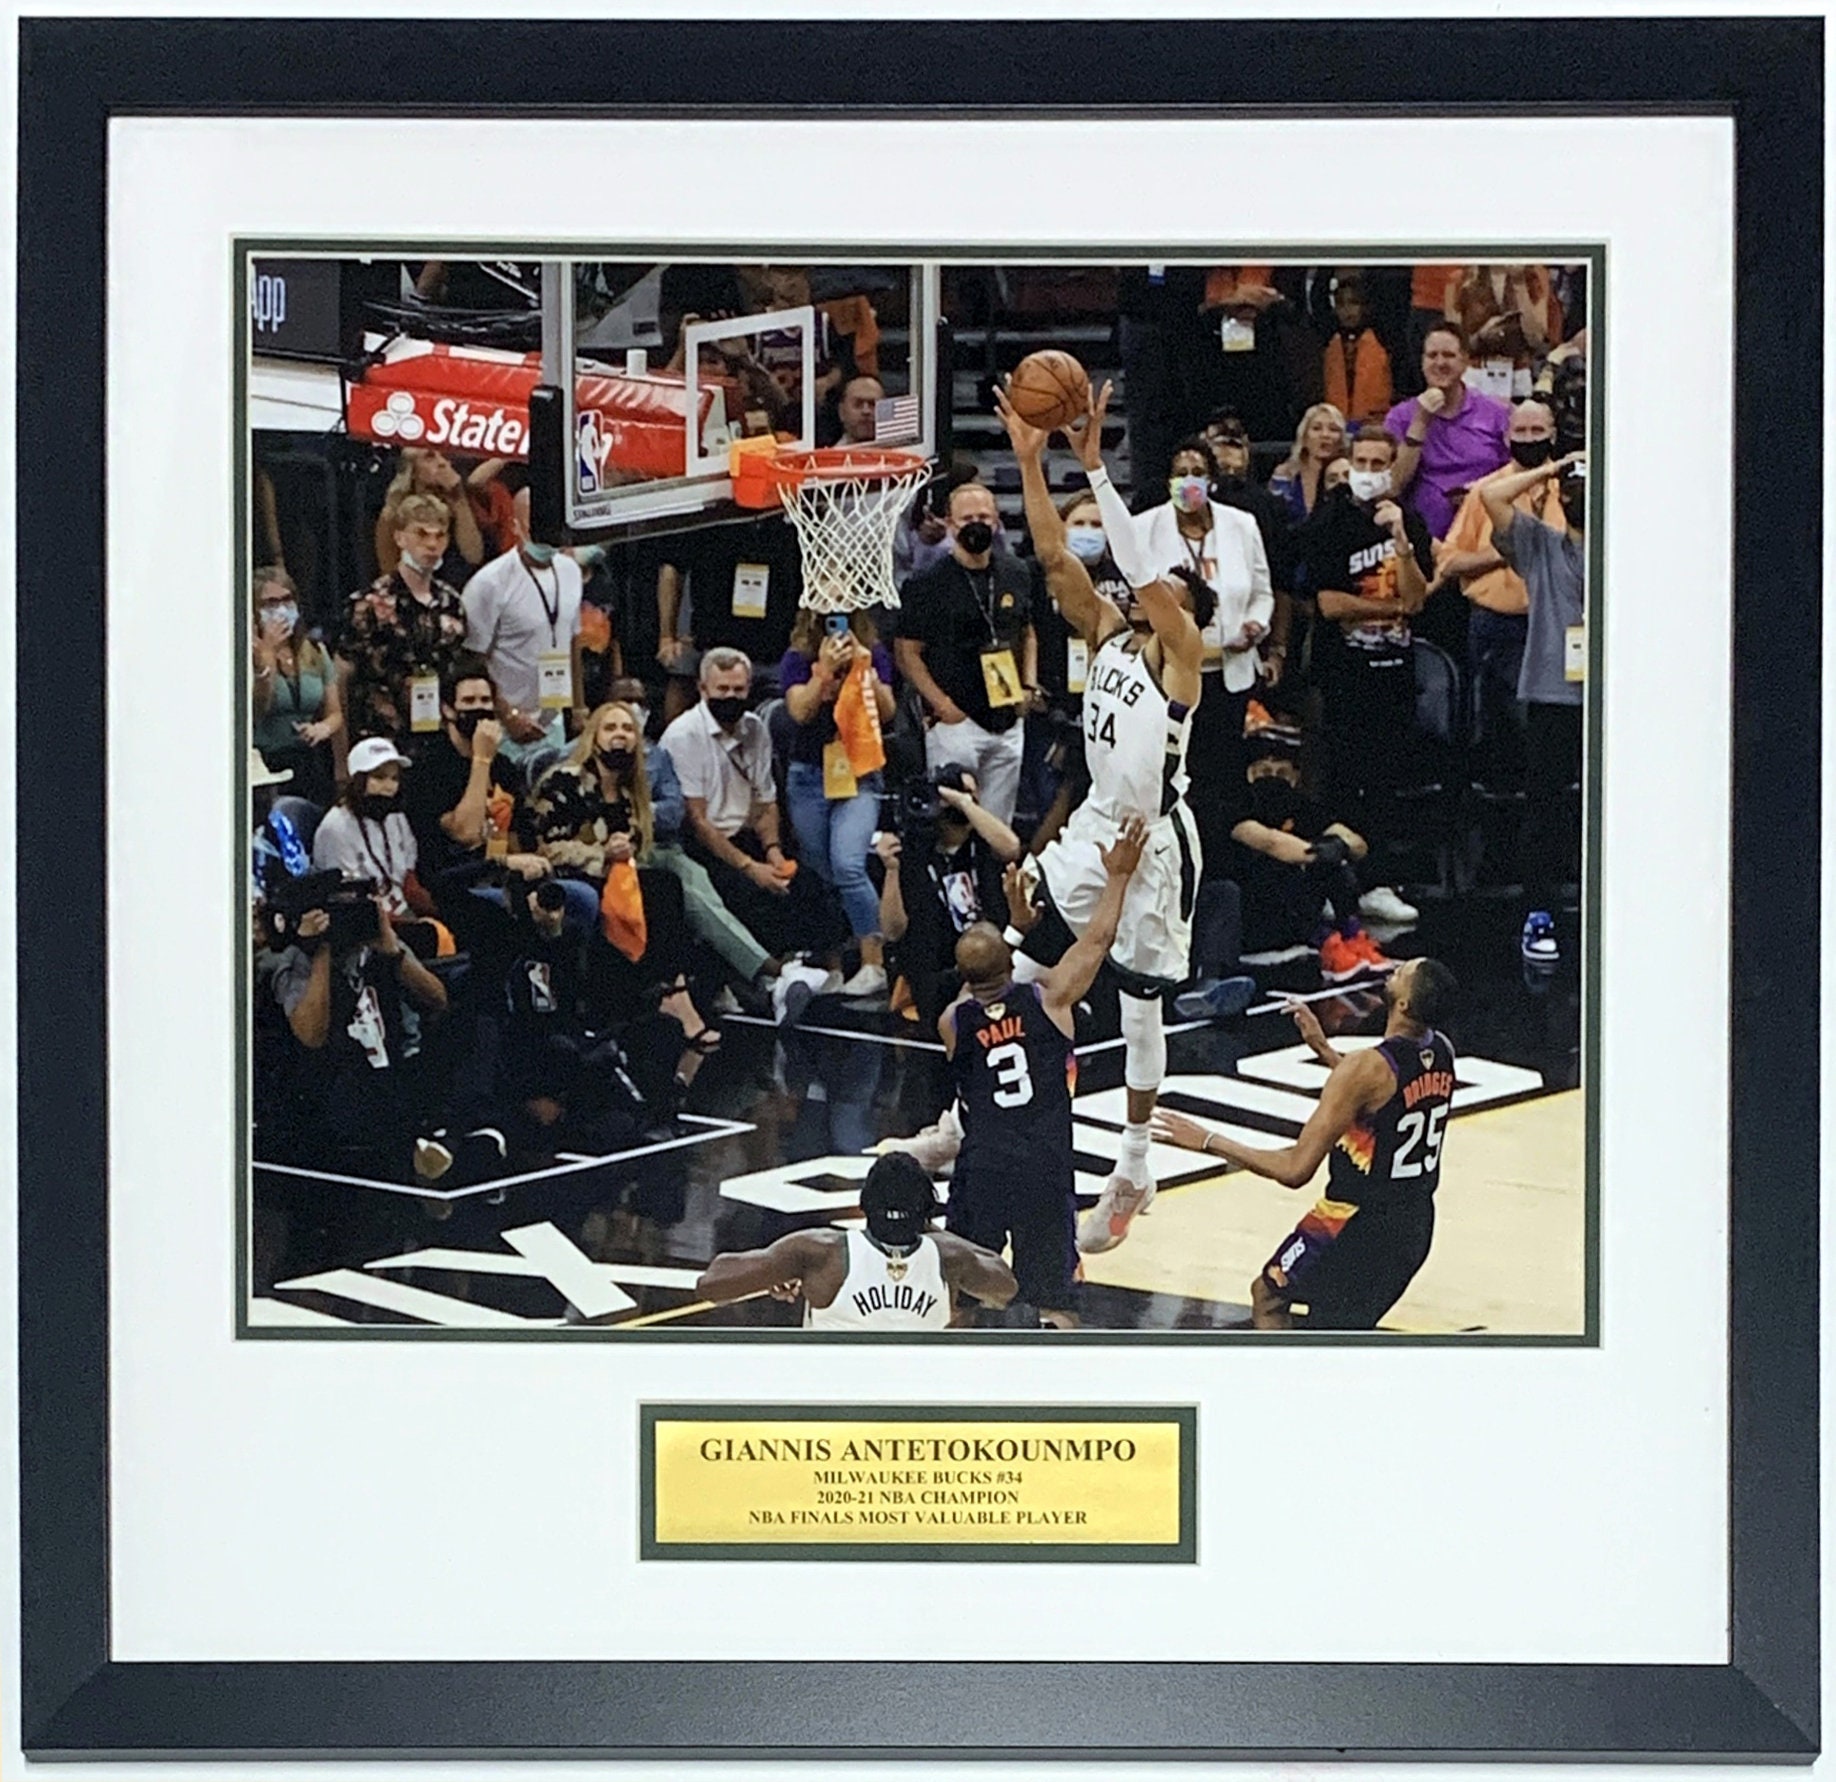 Giannis Antetokounmpo Autographed Signed Authentic MVP Inscribed